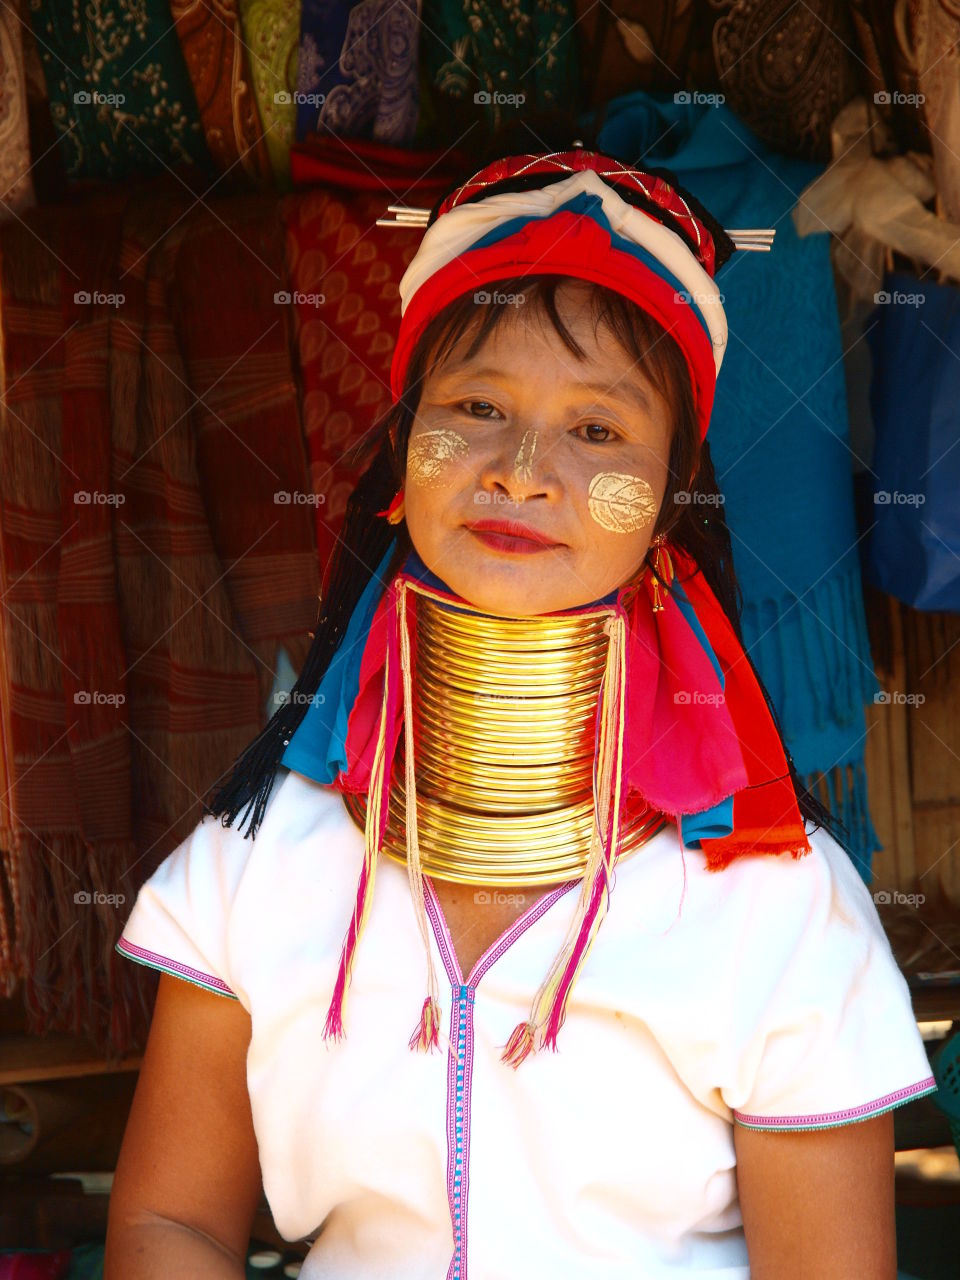 The woman from the Karen tribe in North Thailand